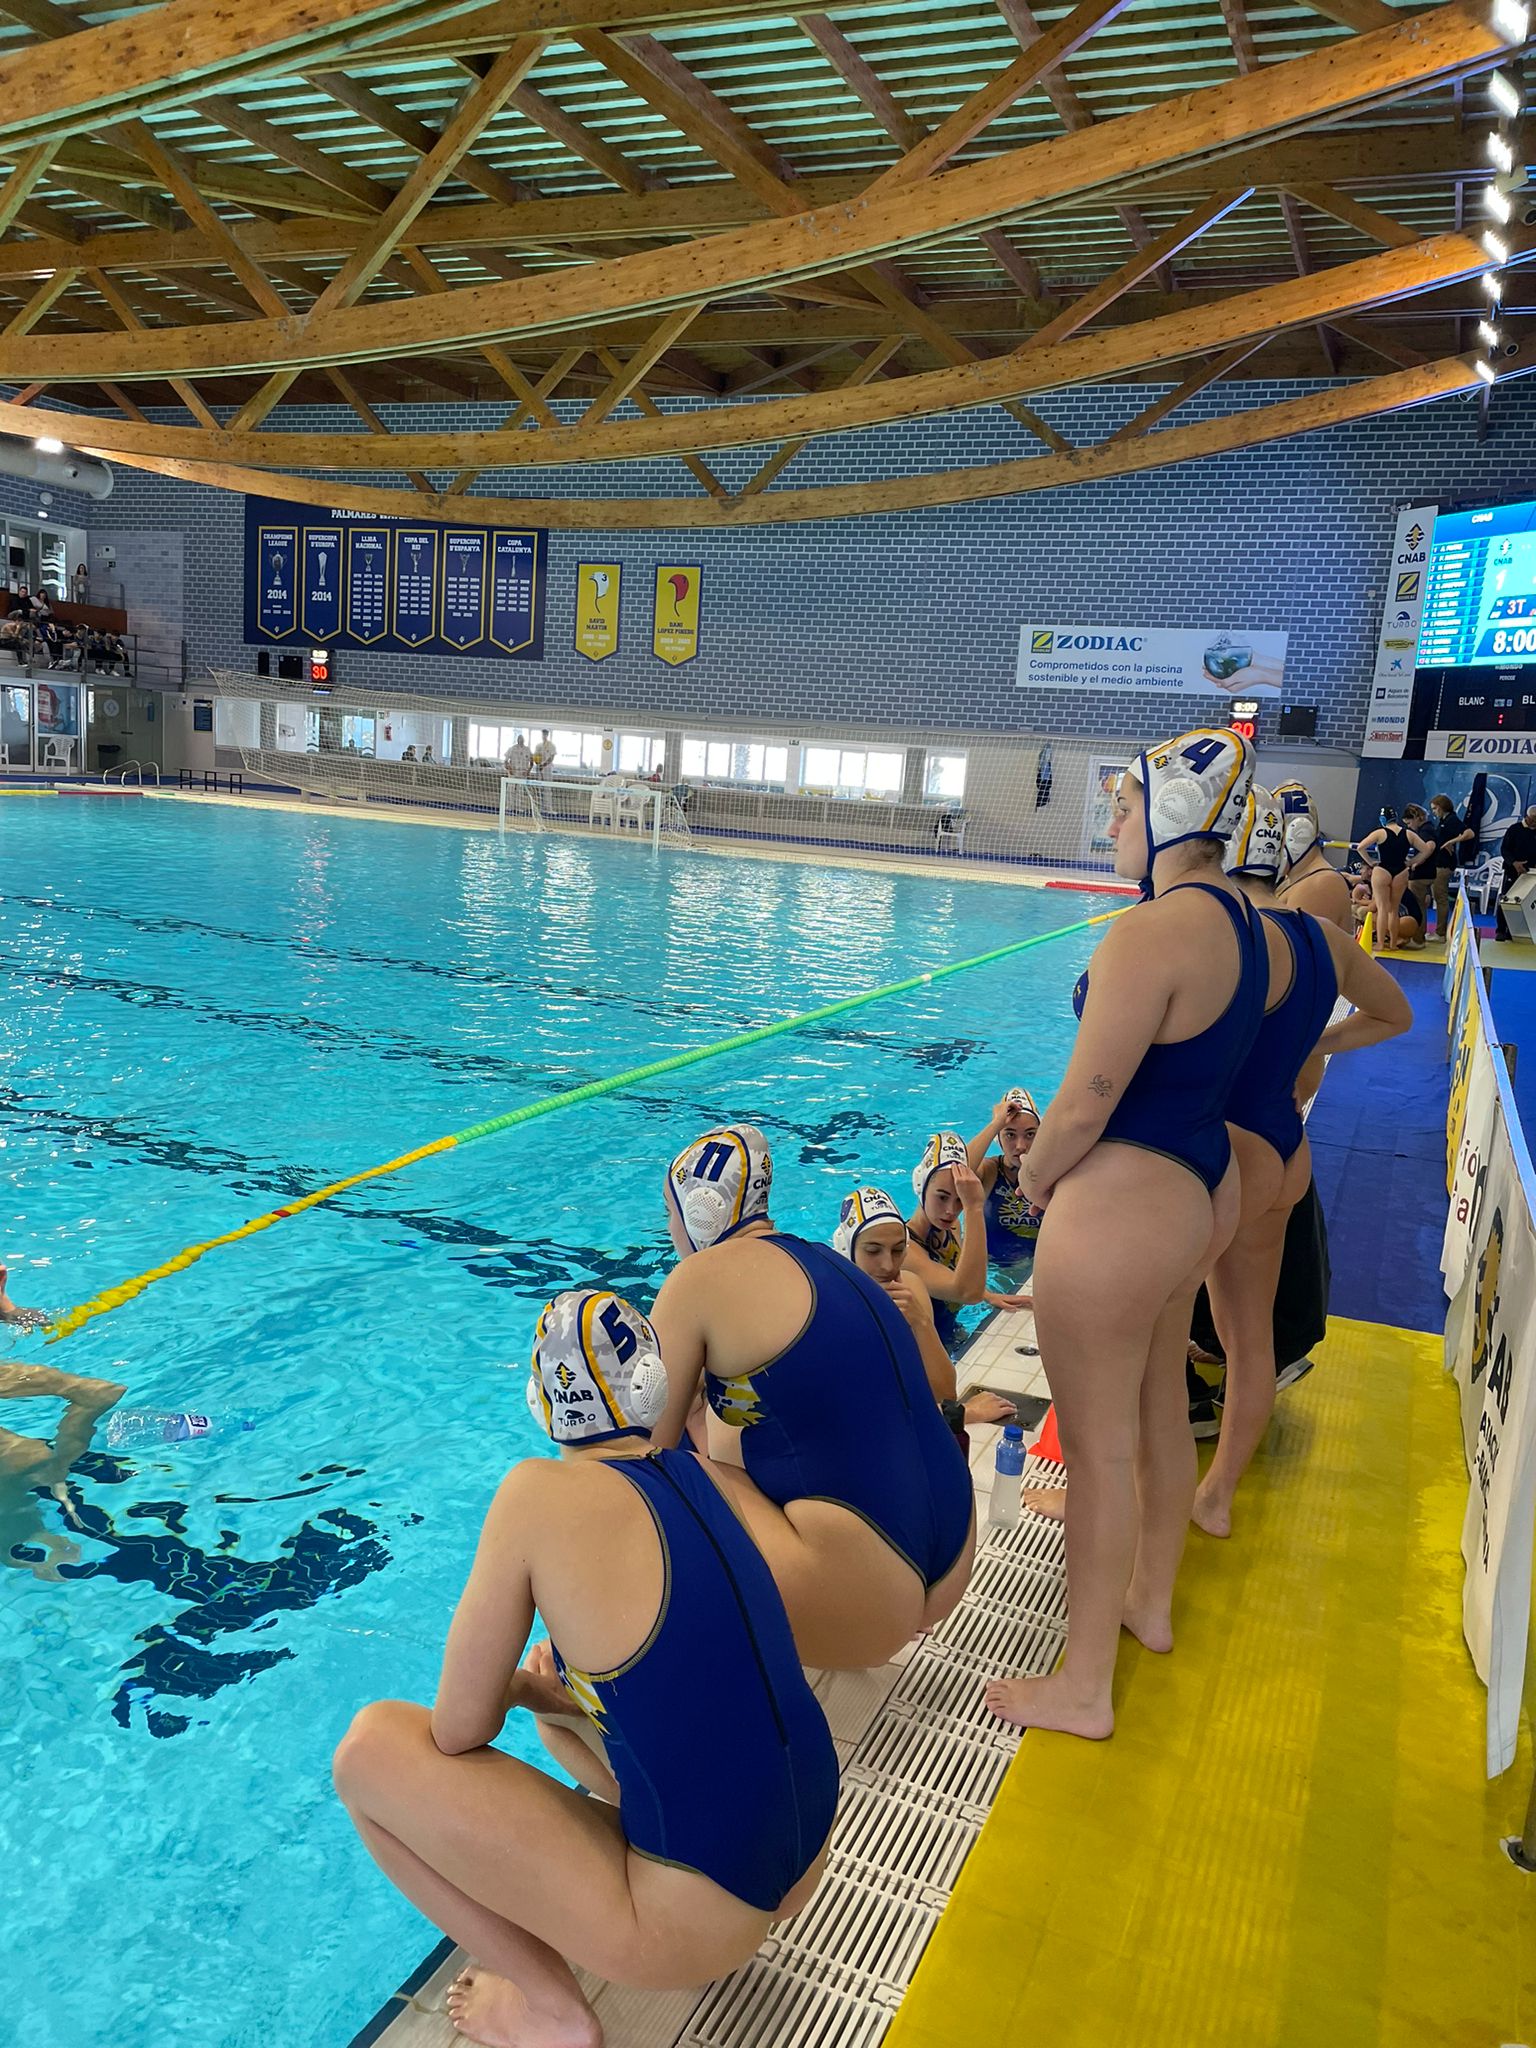 LEWaterpolo J14 (1)